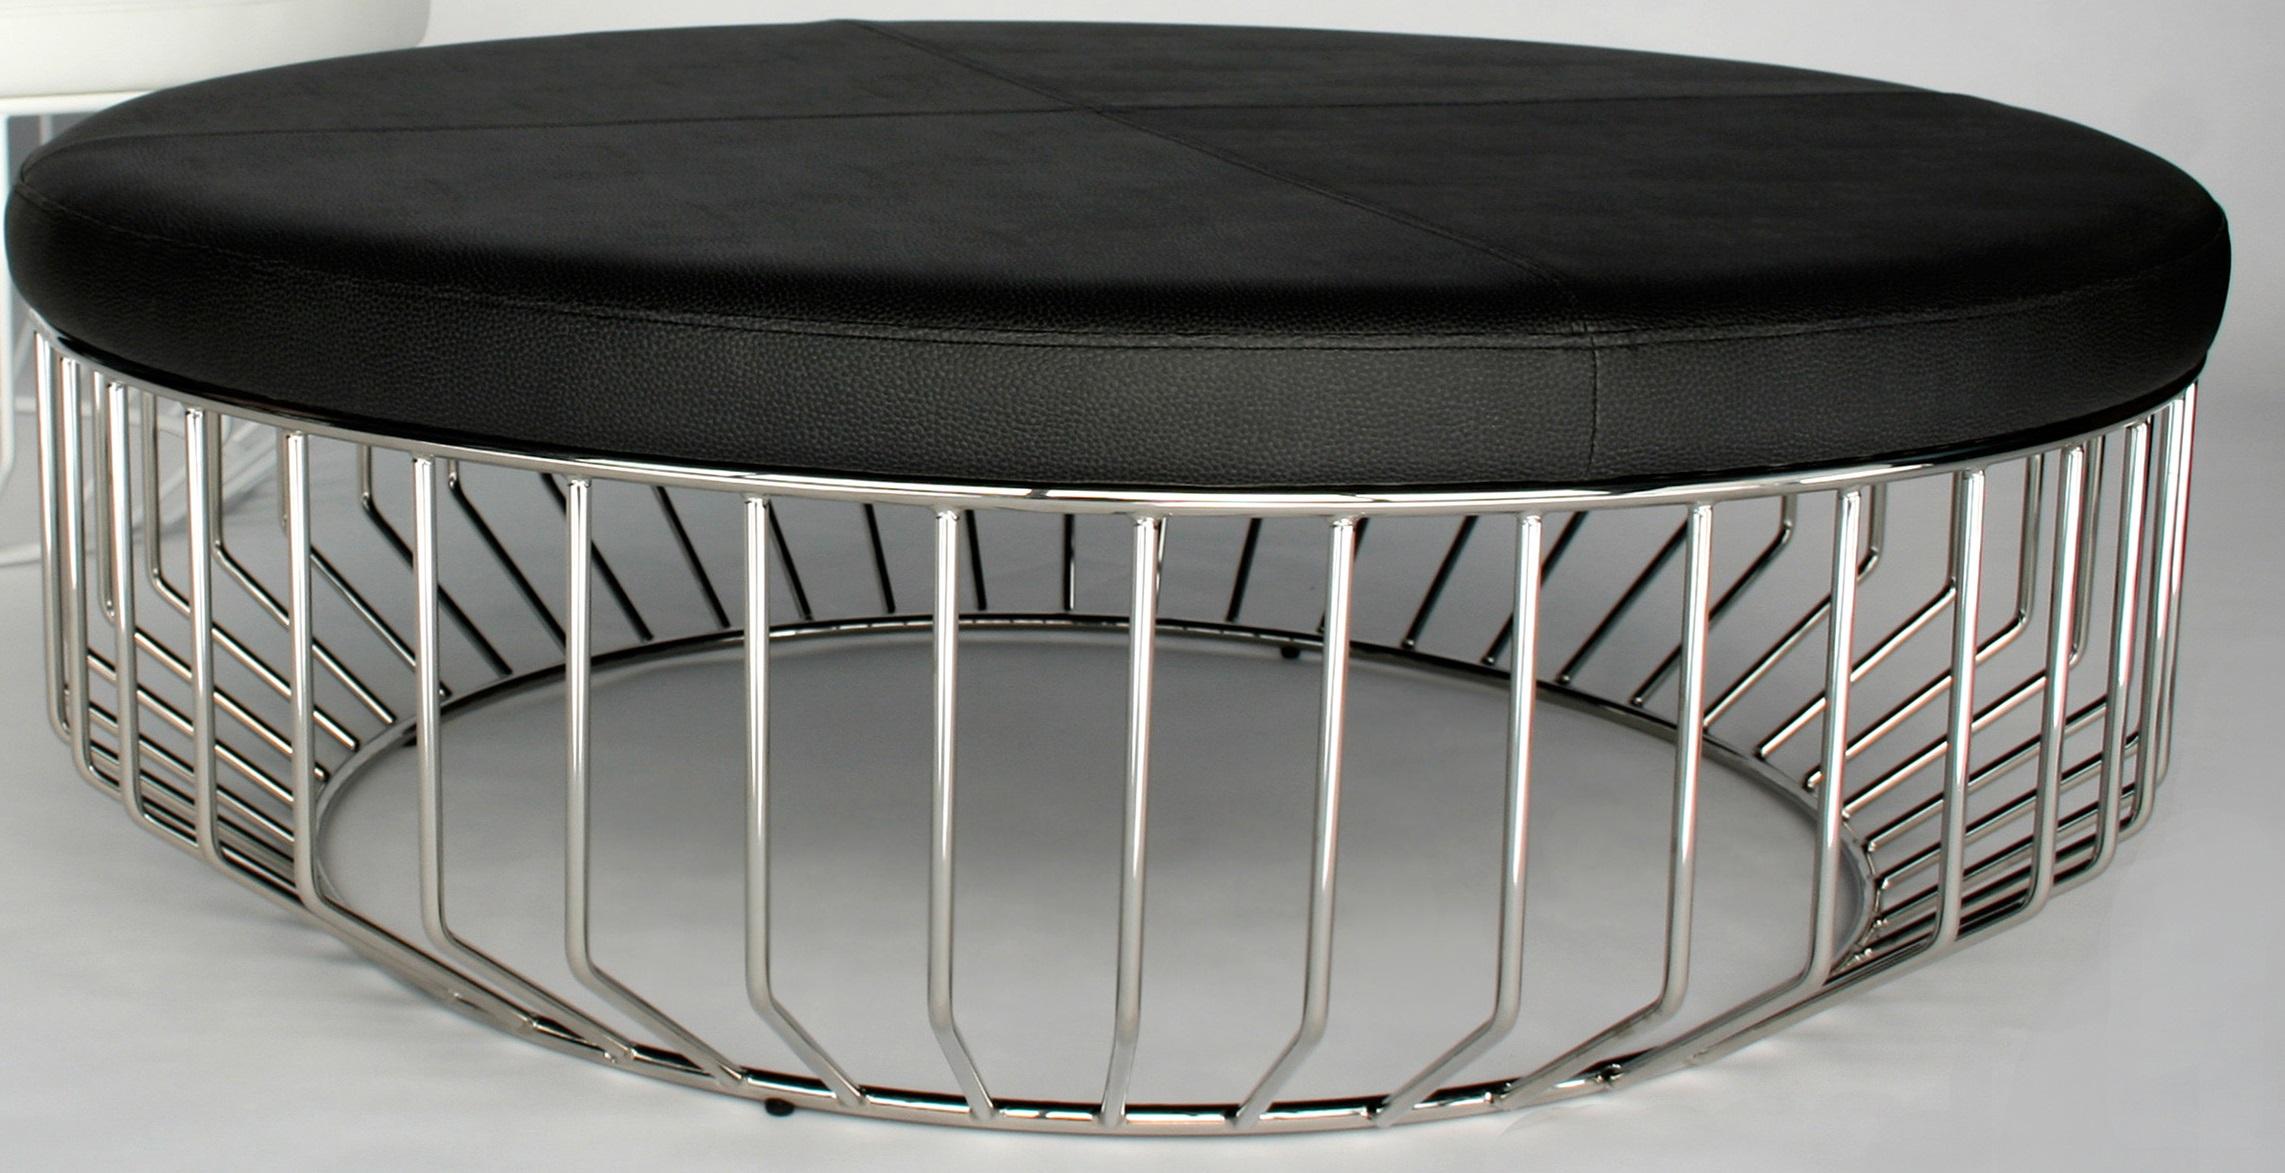 Wired Large Ottoman by Phase Design
Dimensions: Ø 106.7 x H 35.6 cm. 
Materials: Polished chrome and leather.

Solid steel bar with upholstered tops. Steel available in gloss or flat black and white, polished chrome, burnt copper, or smoked brass